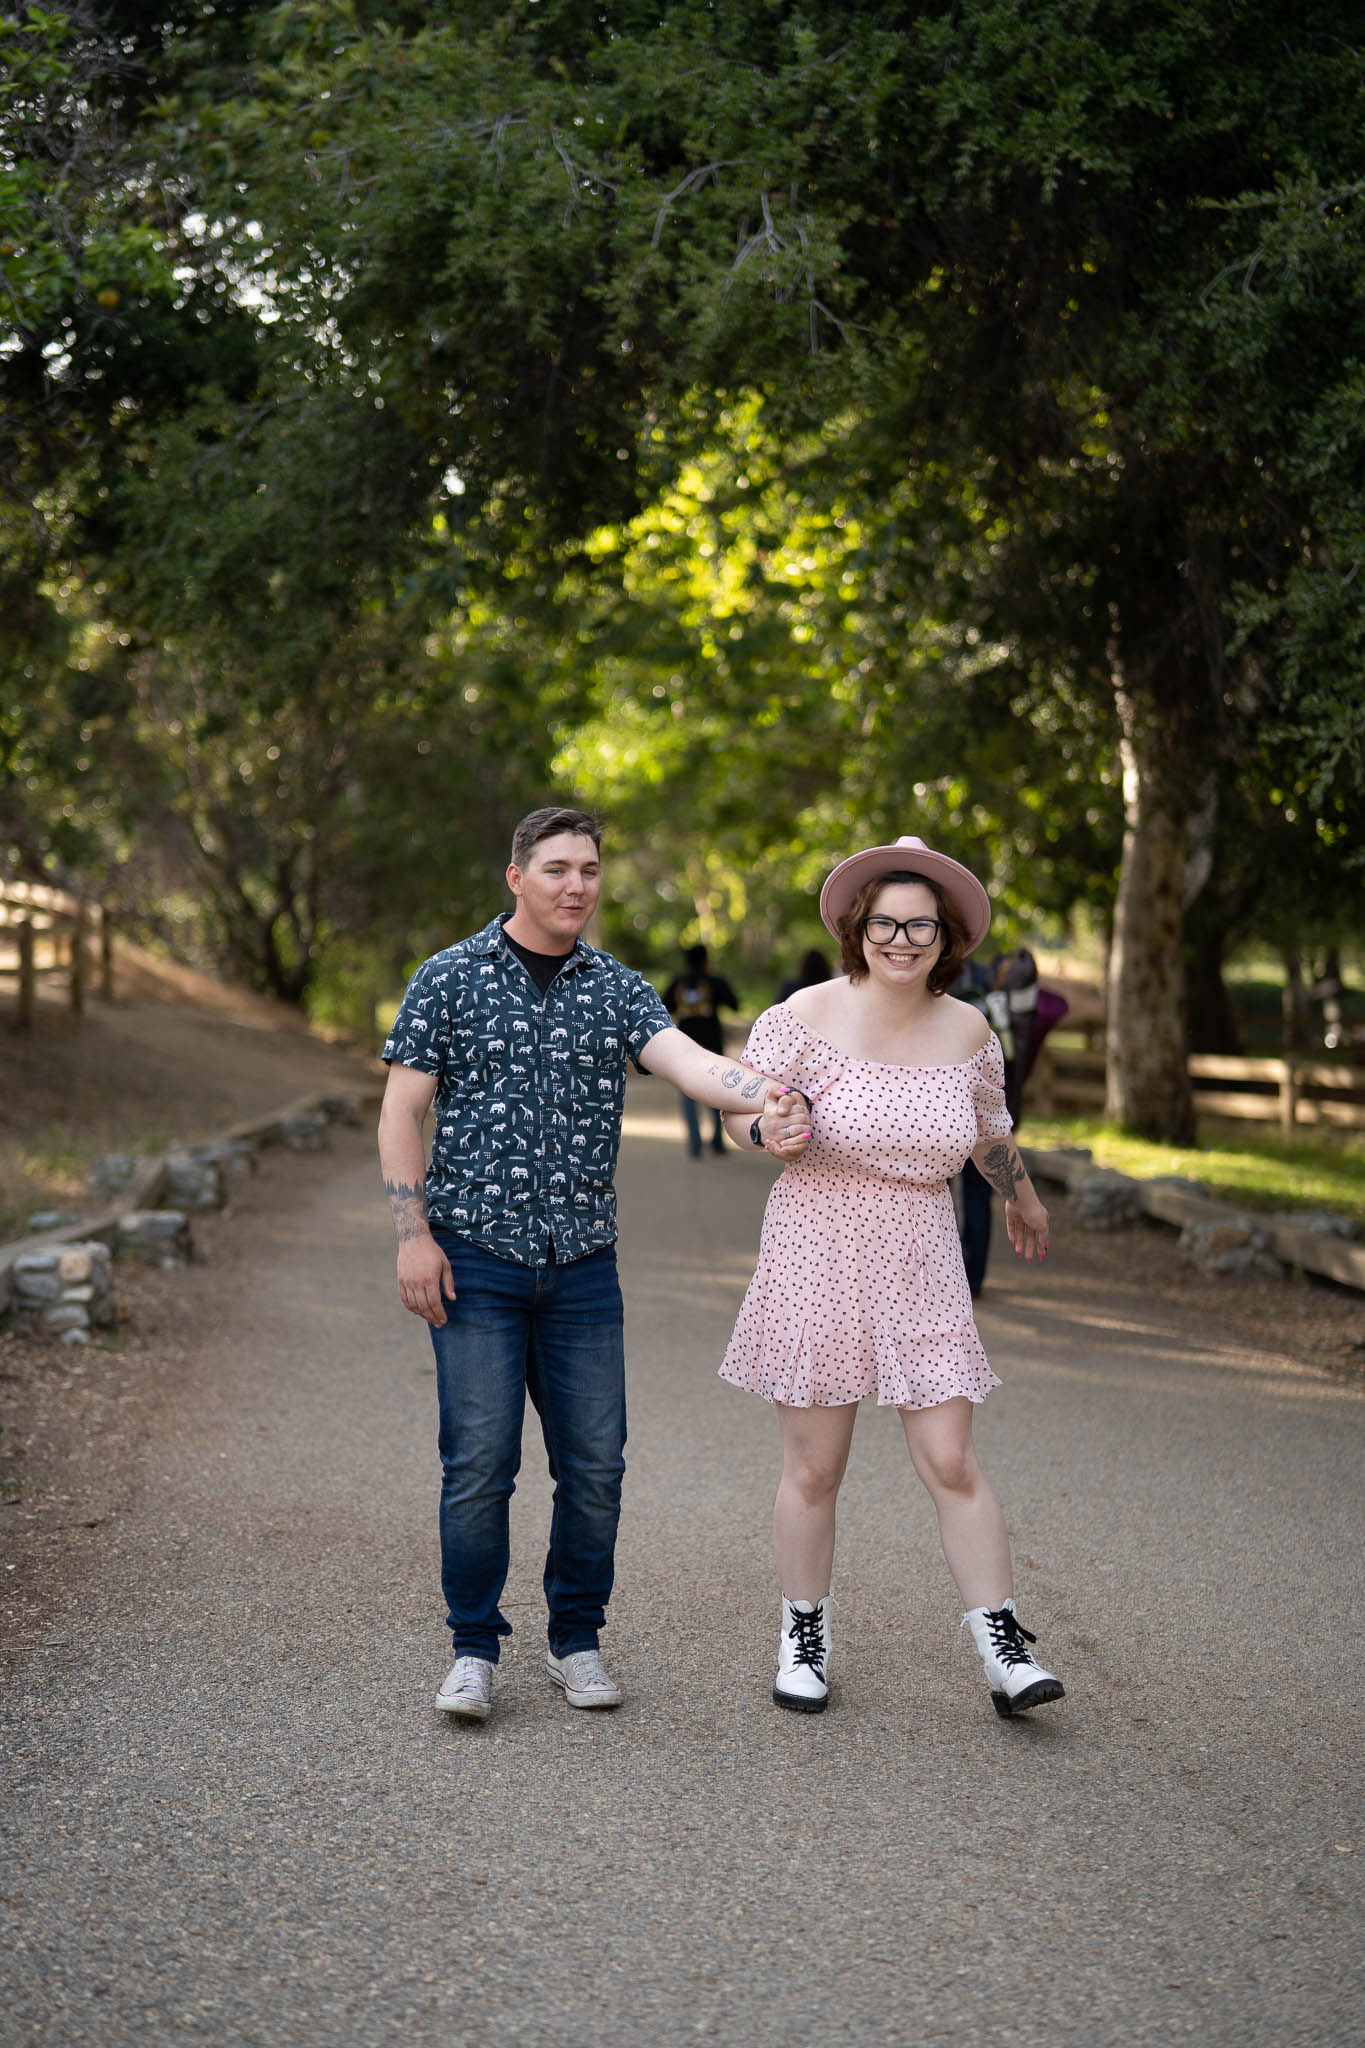 ThomasKim_photography K and S's engagement session, with a couple walking down a path in a park.